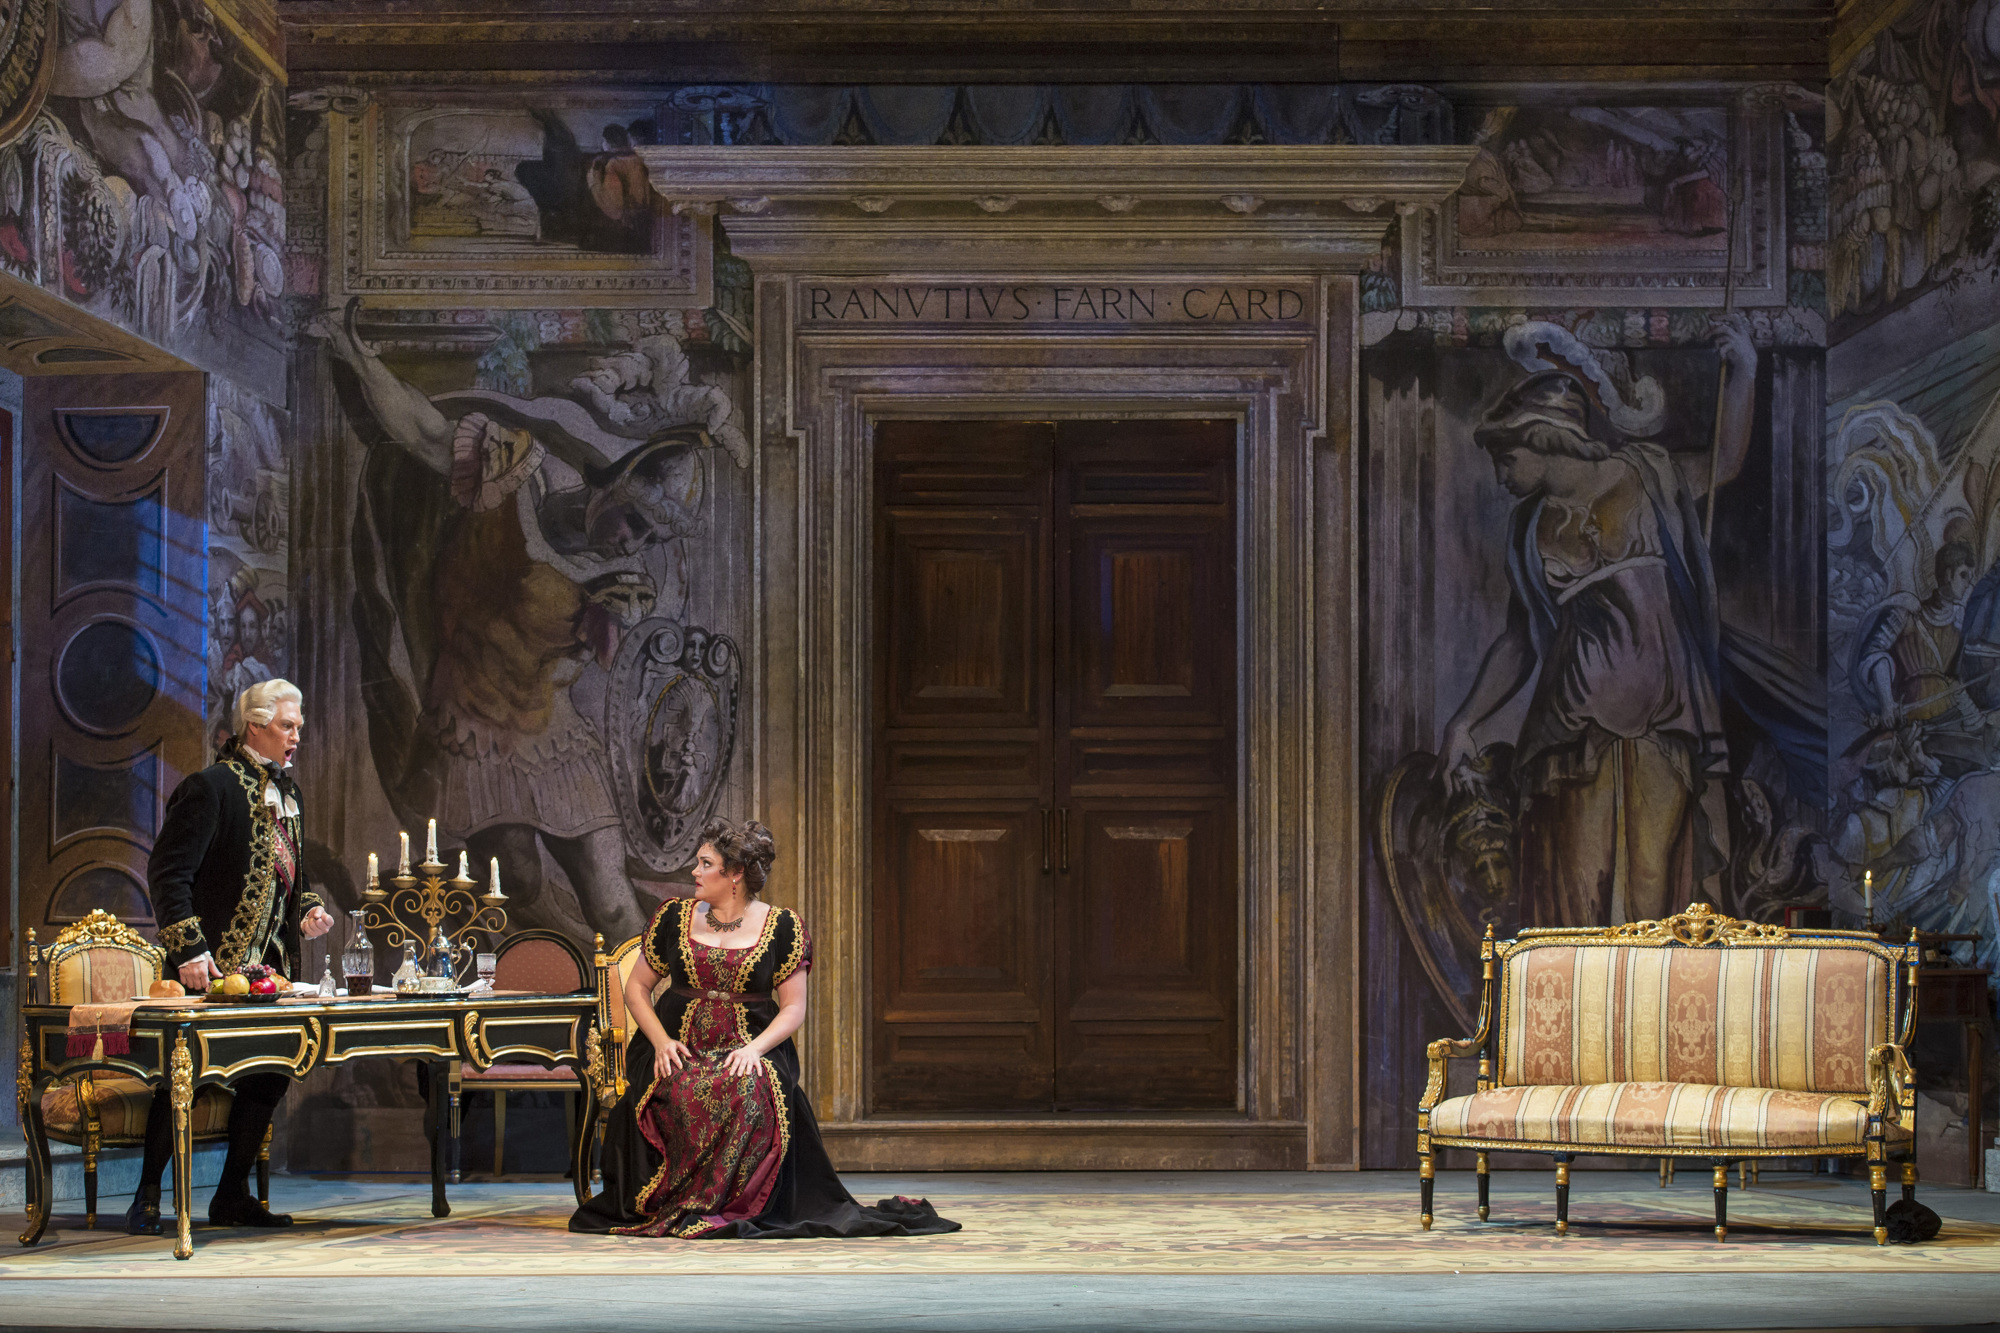 Giacomo Puccini's opera about the Napoleonic invasion of Italy will thrill Sarasota audiences.